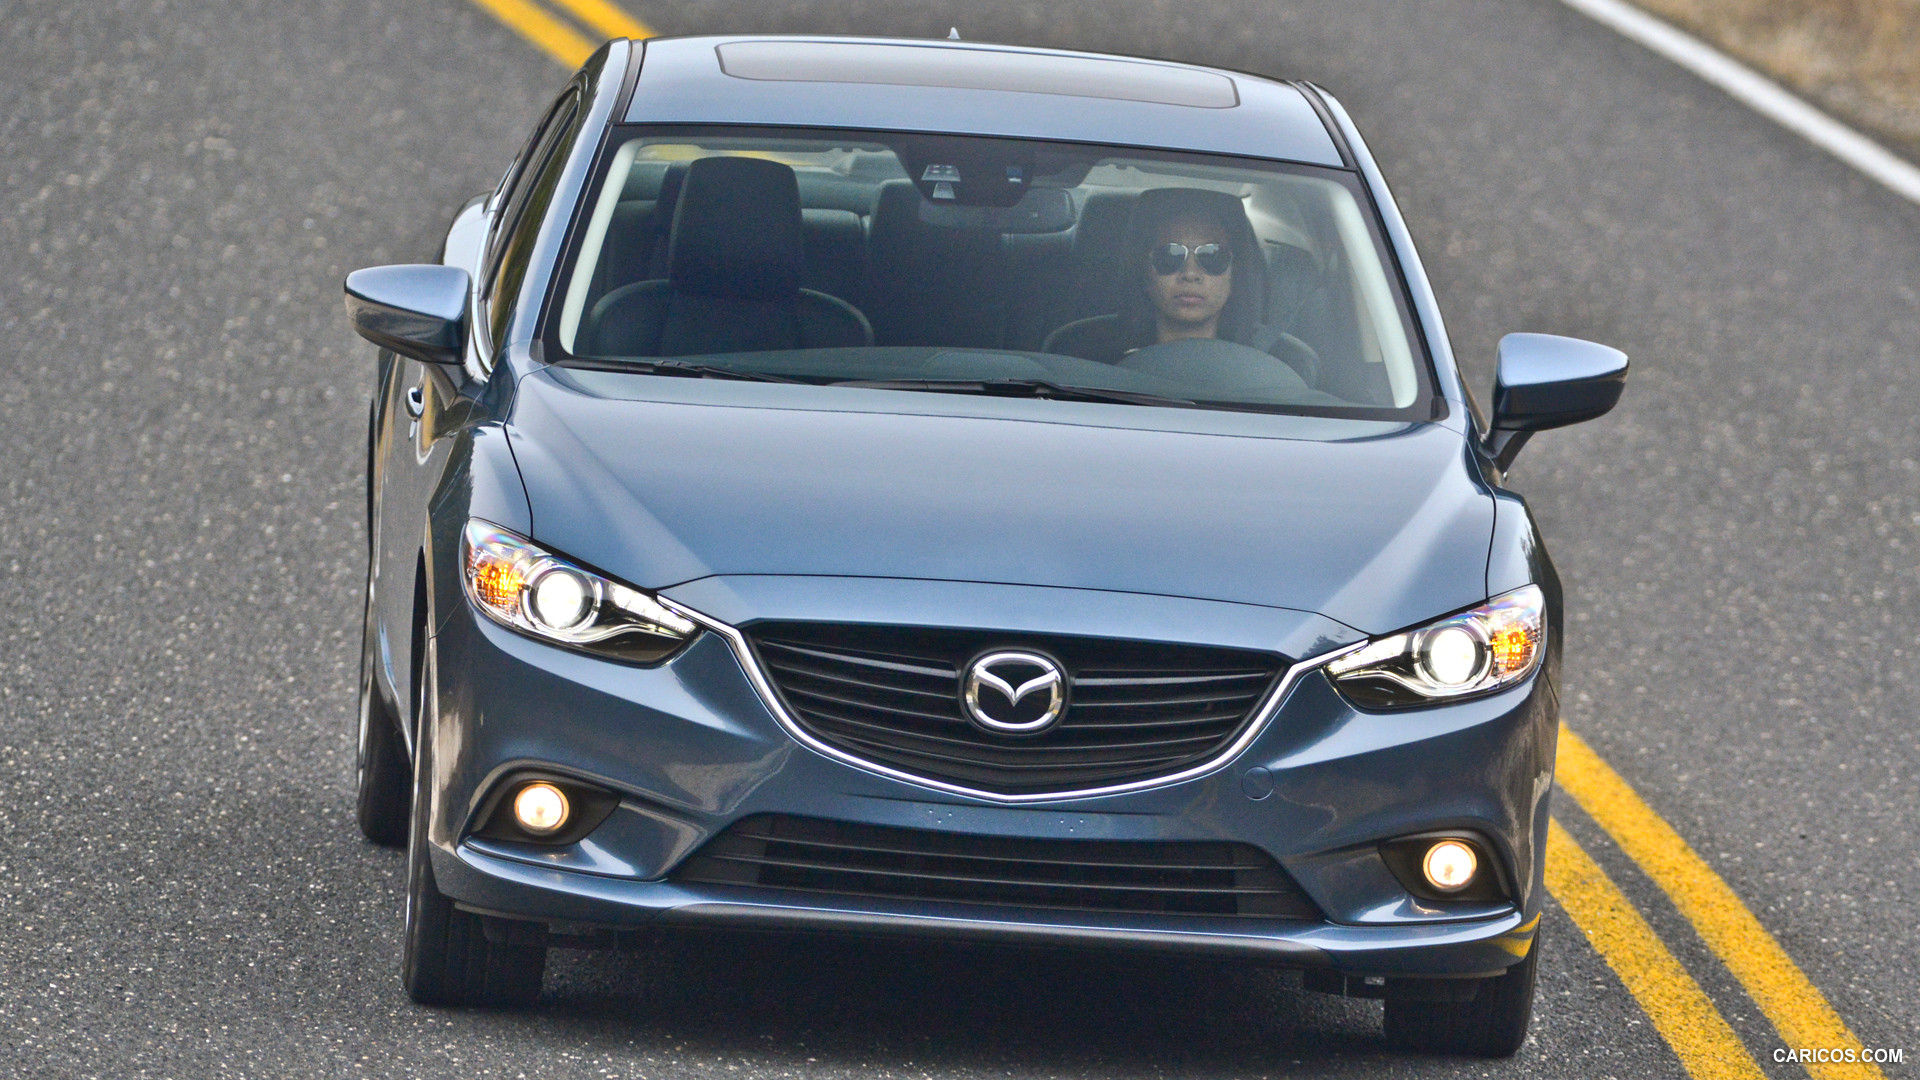 2014 Mazda6 GT - Front, #135 of 179